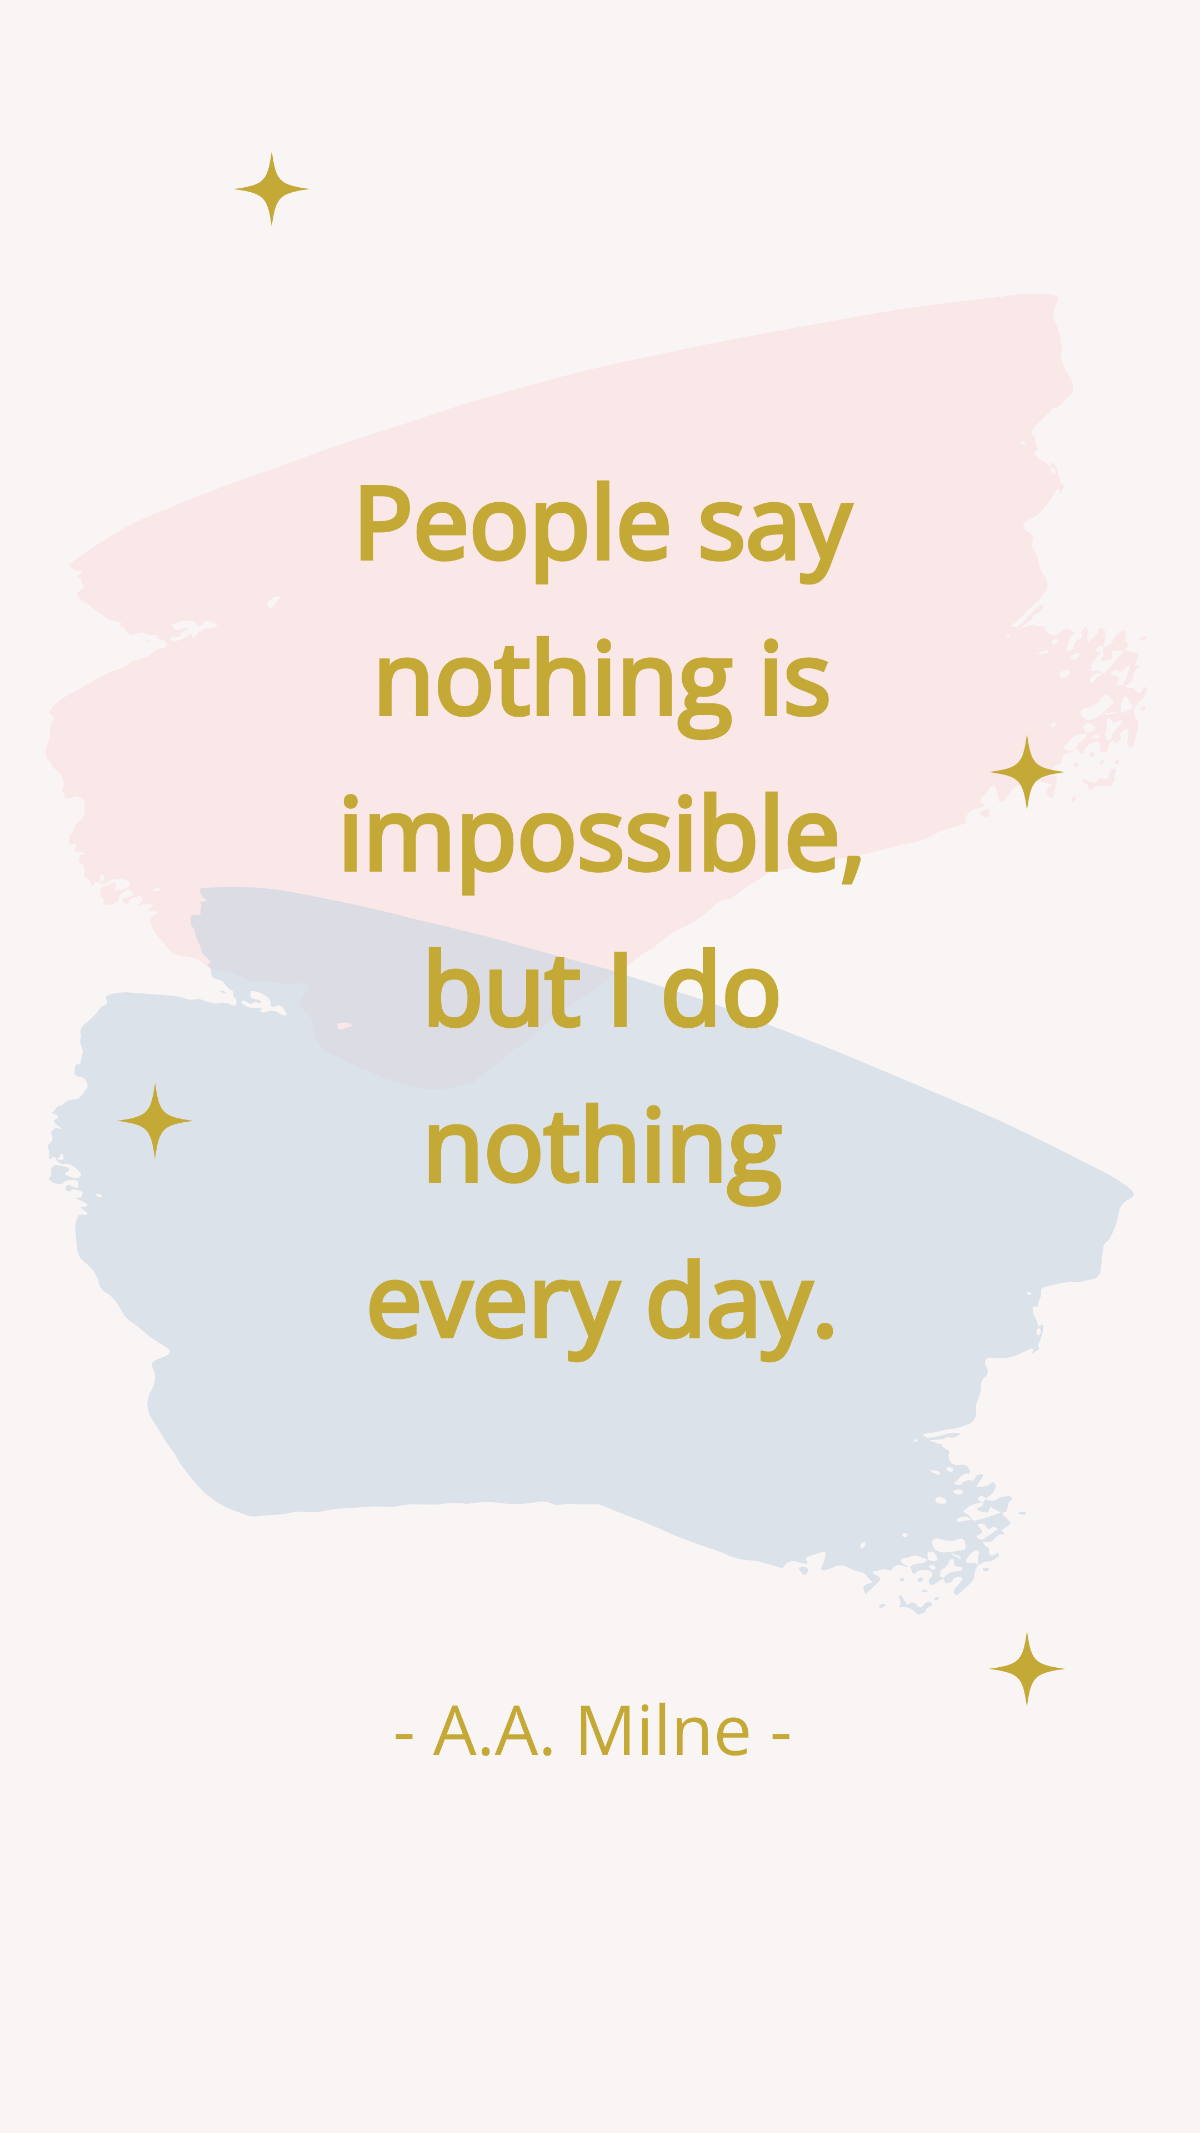 A.A. Milne - People say nothing is impossible, but I do nothing every day.